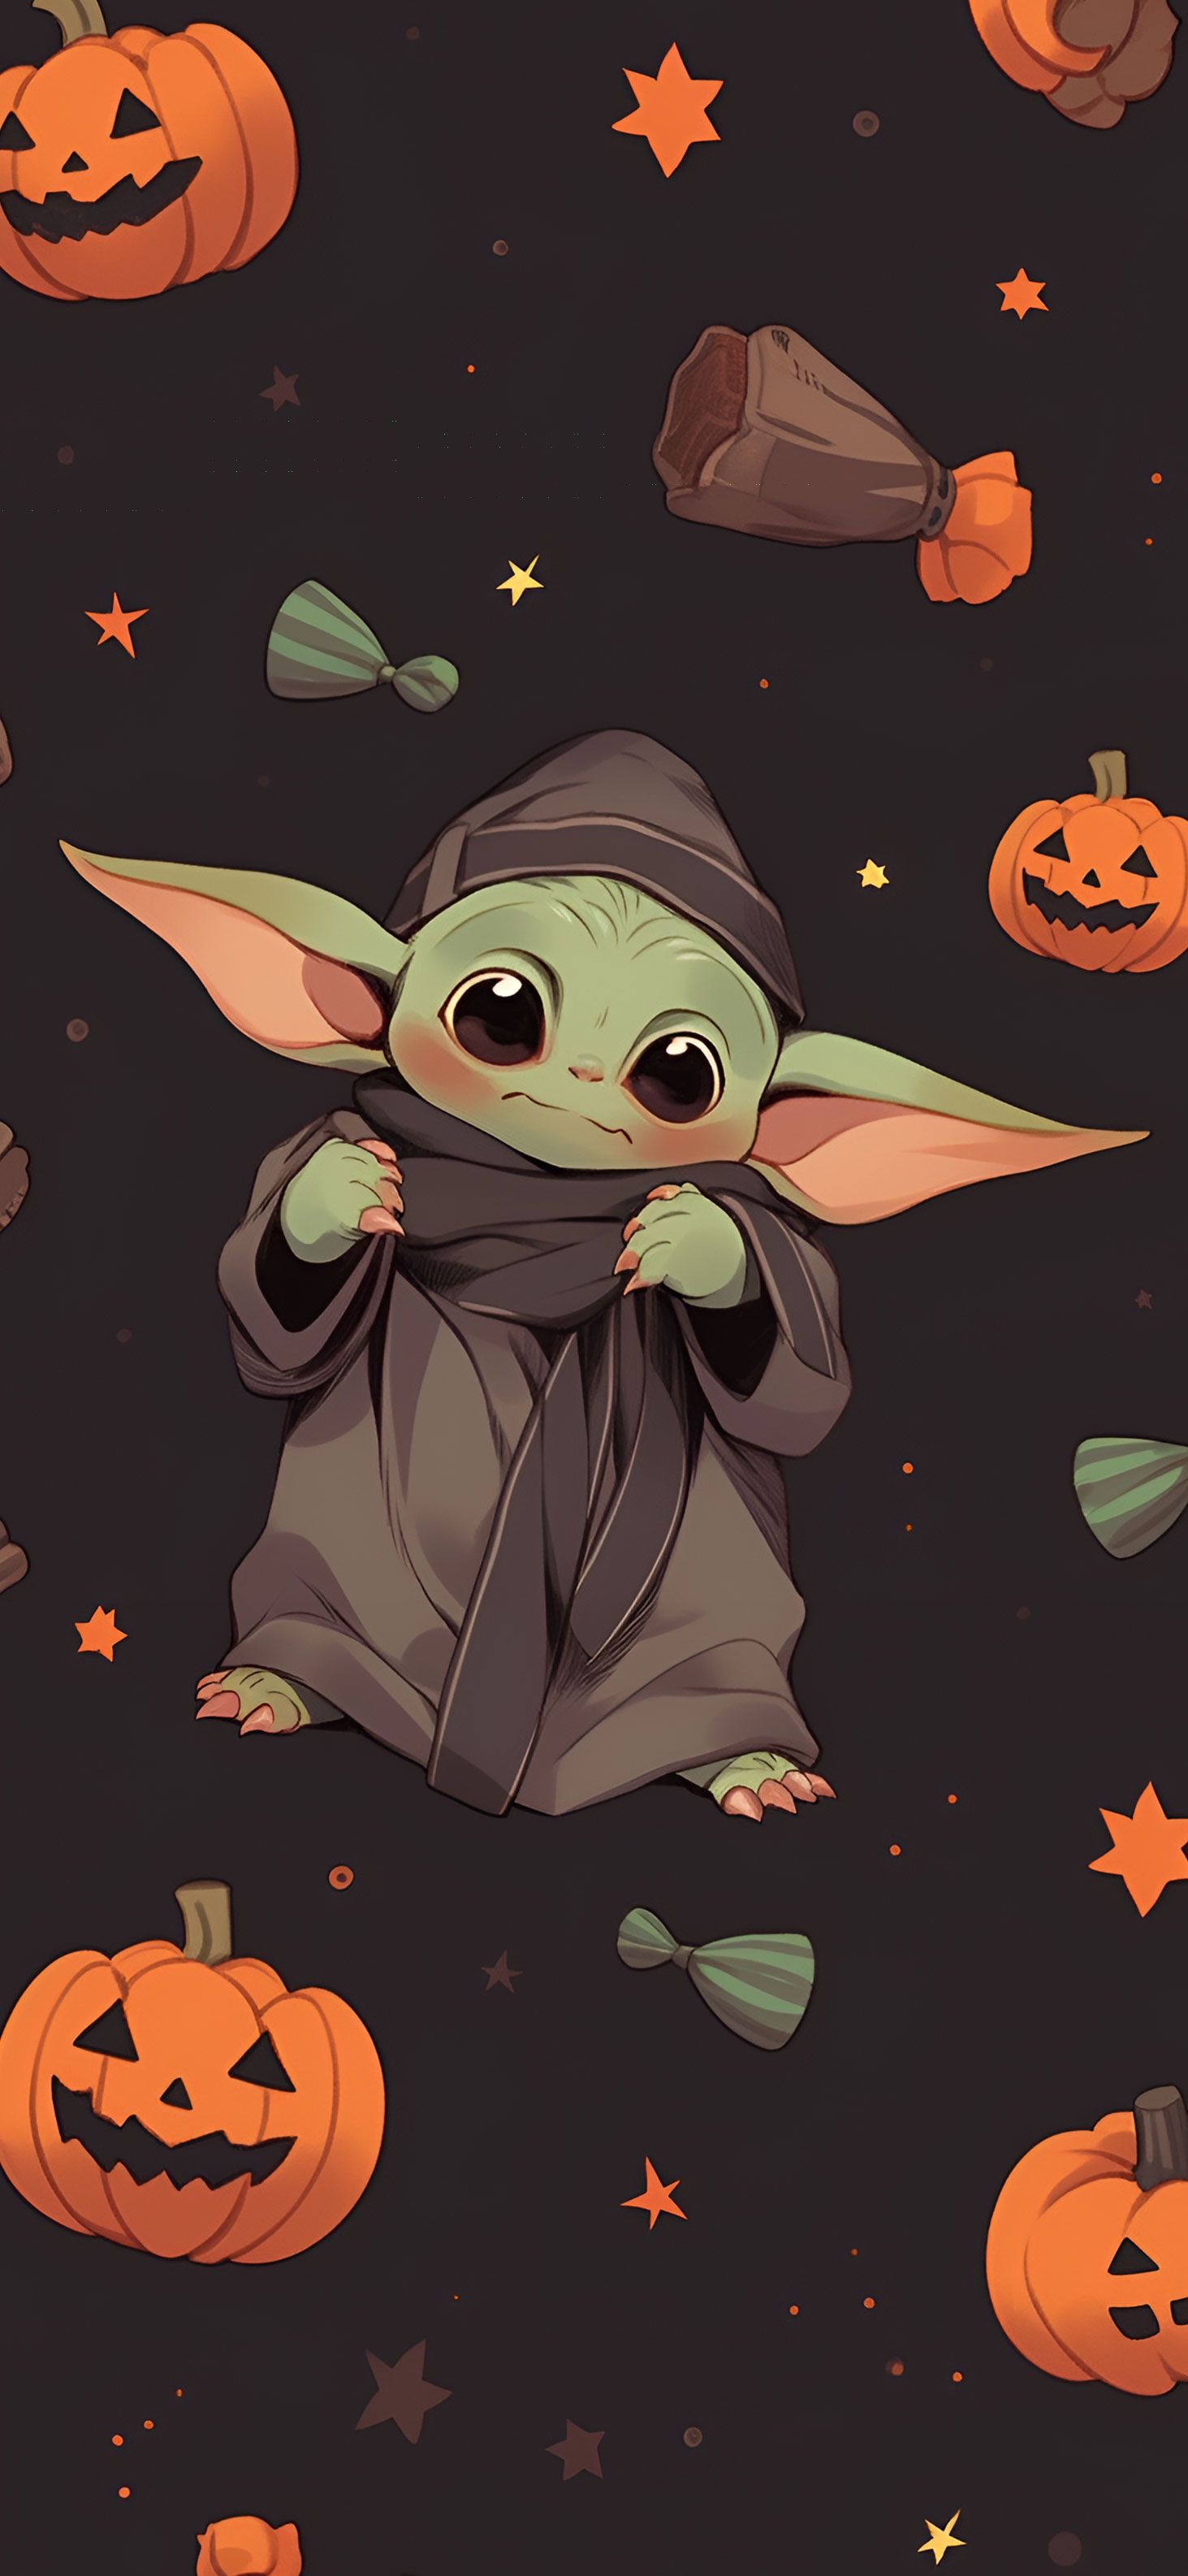 IPhone wallpaper of baby yoda from the mandalorian with halloween elements - Baby Yoda